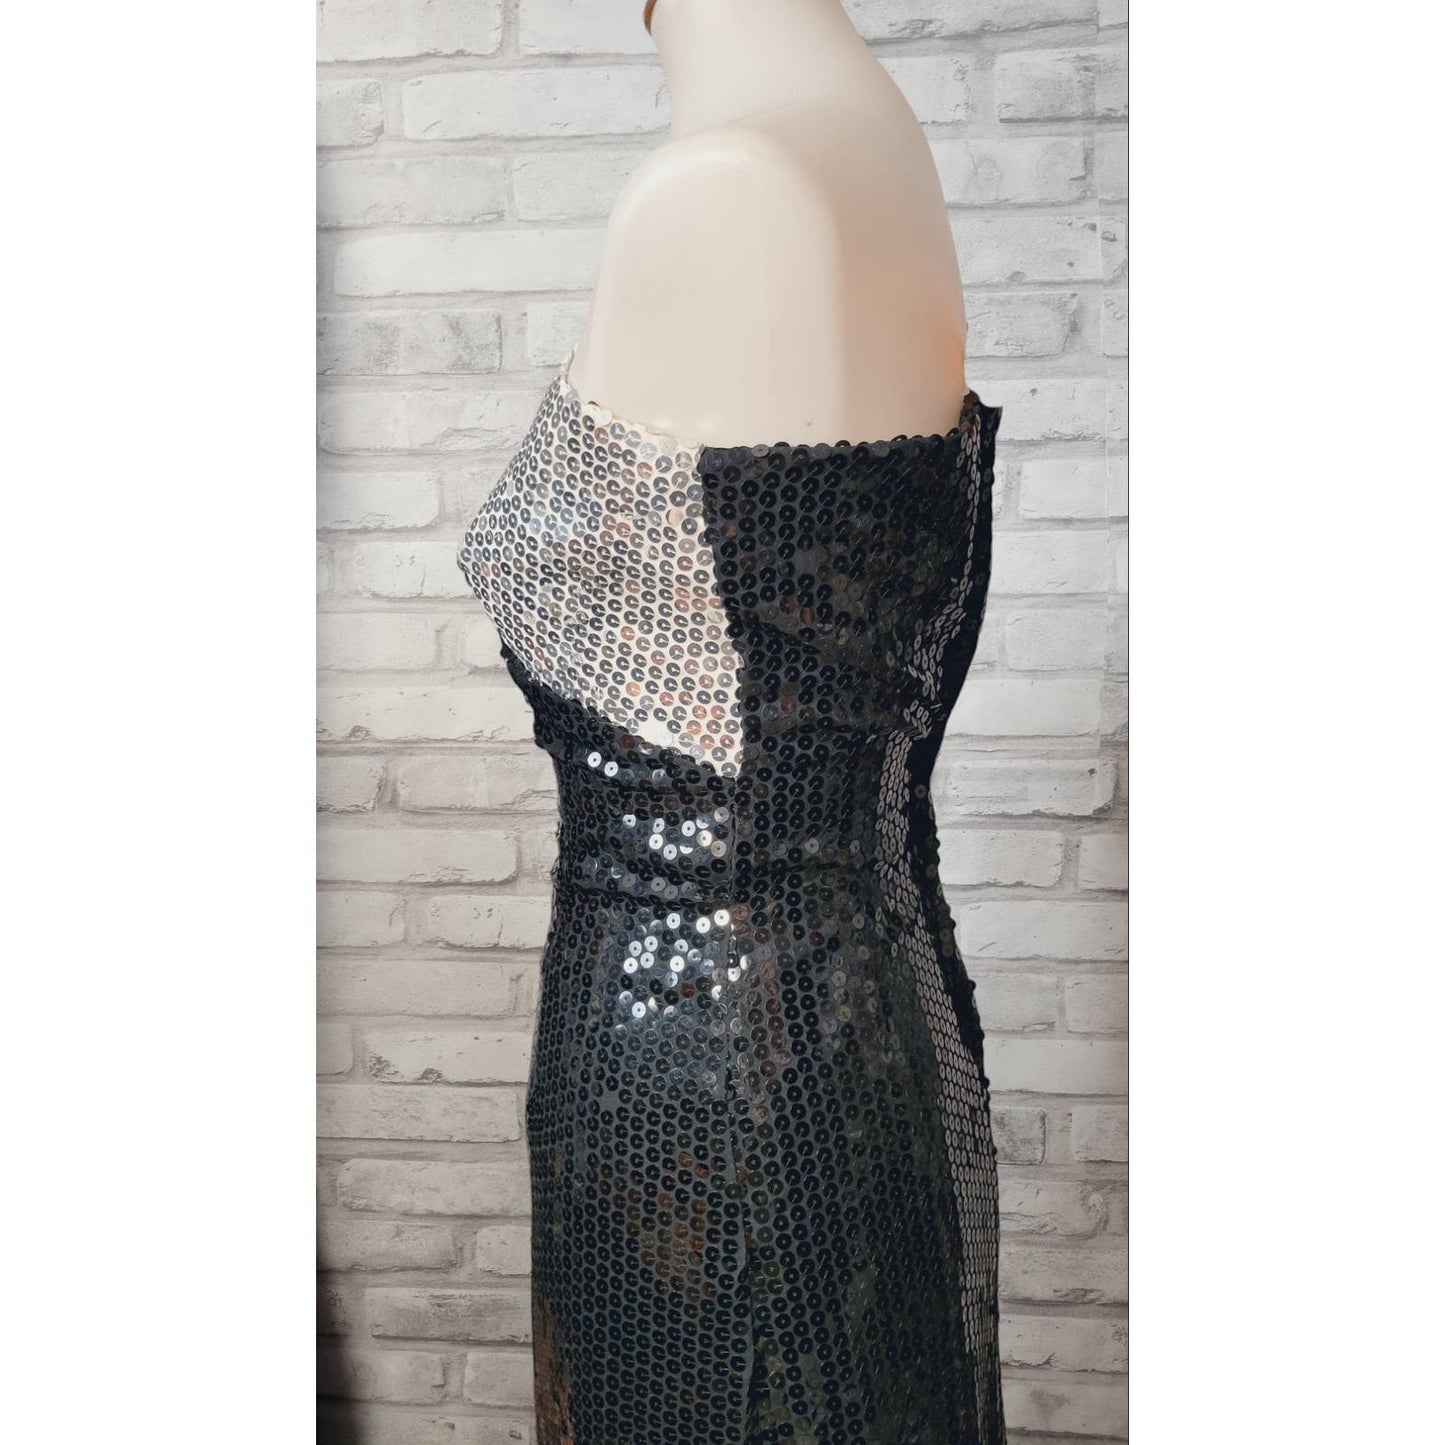 Alyce Designs 1980s sequin evening gown prom dress, one shoulder, black and white, silver, vintage size 6, XS 30 bust